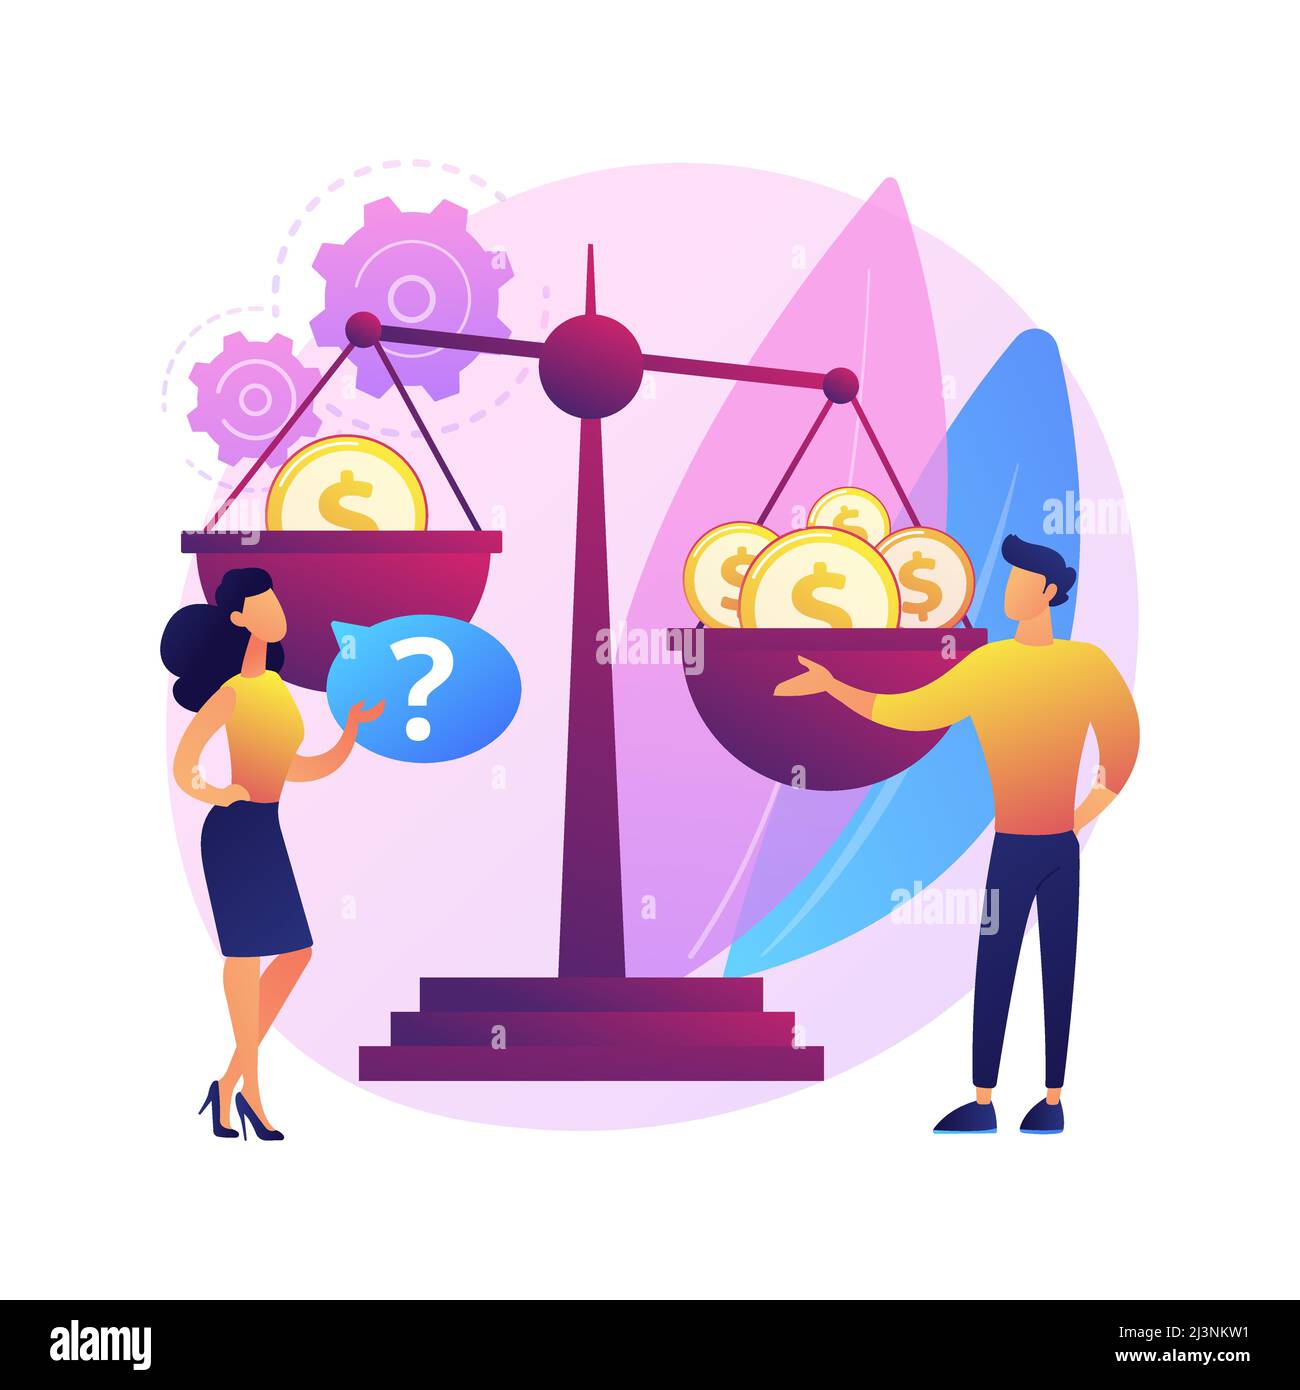 Gender discrimination abstract concept vector illustration. Sexism, gender roles and stereotypes, workplace inequality, skills and capabilities, women Stock Vector